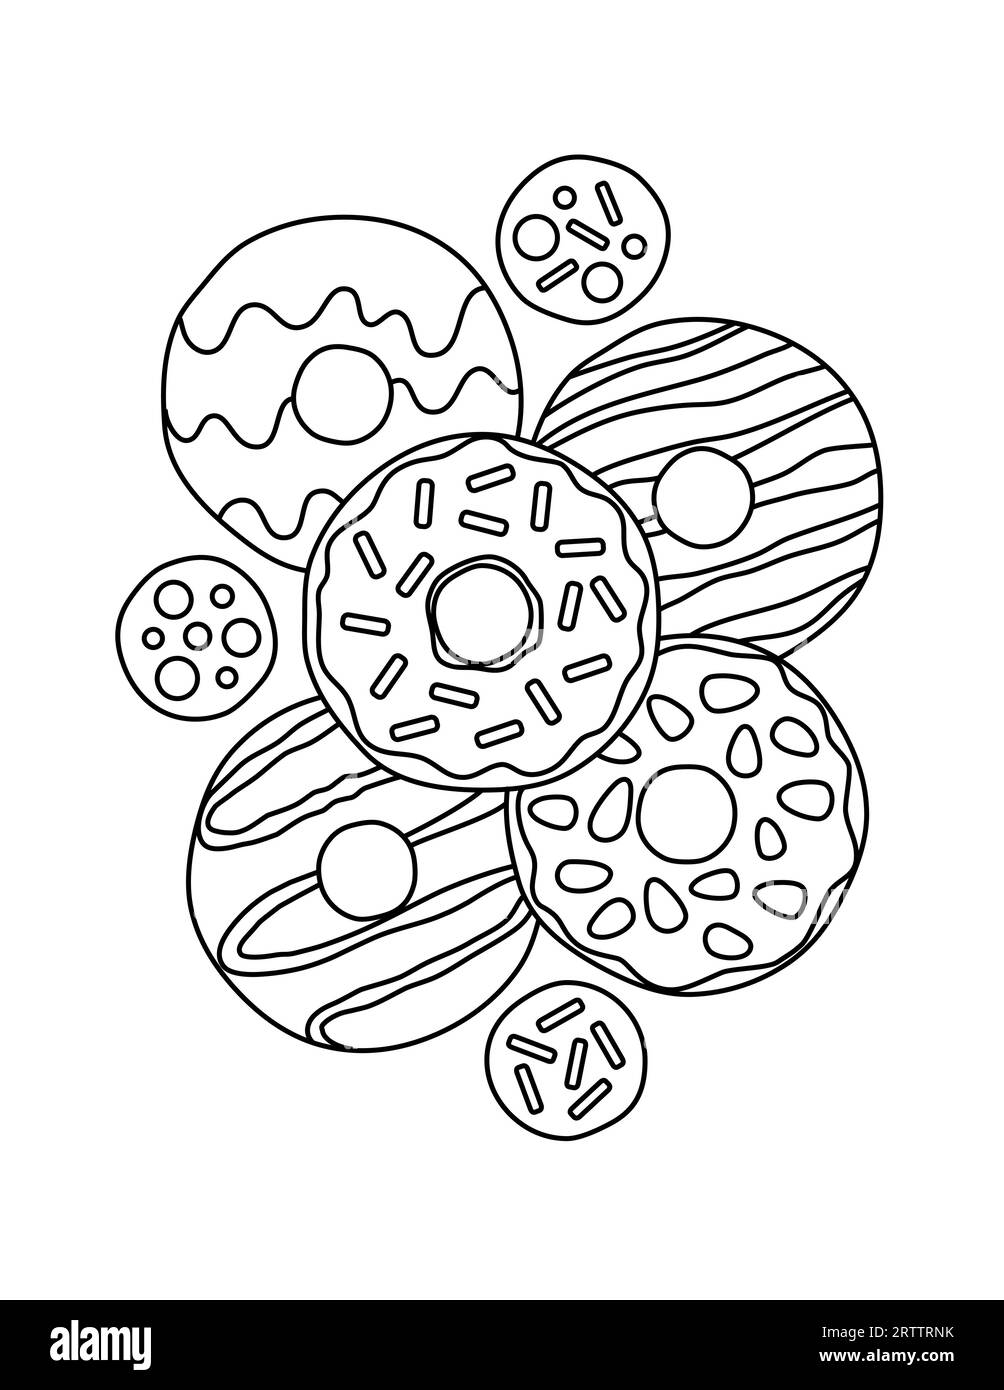 Cute Donut Black Outline Coloring Page Stock Vector